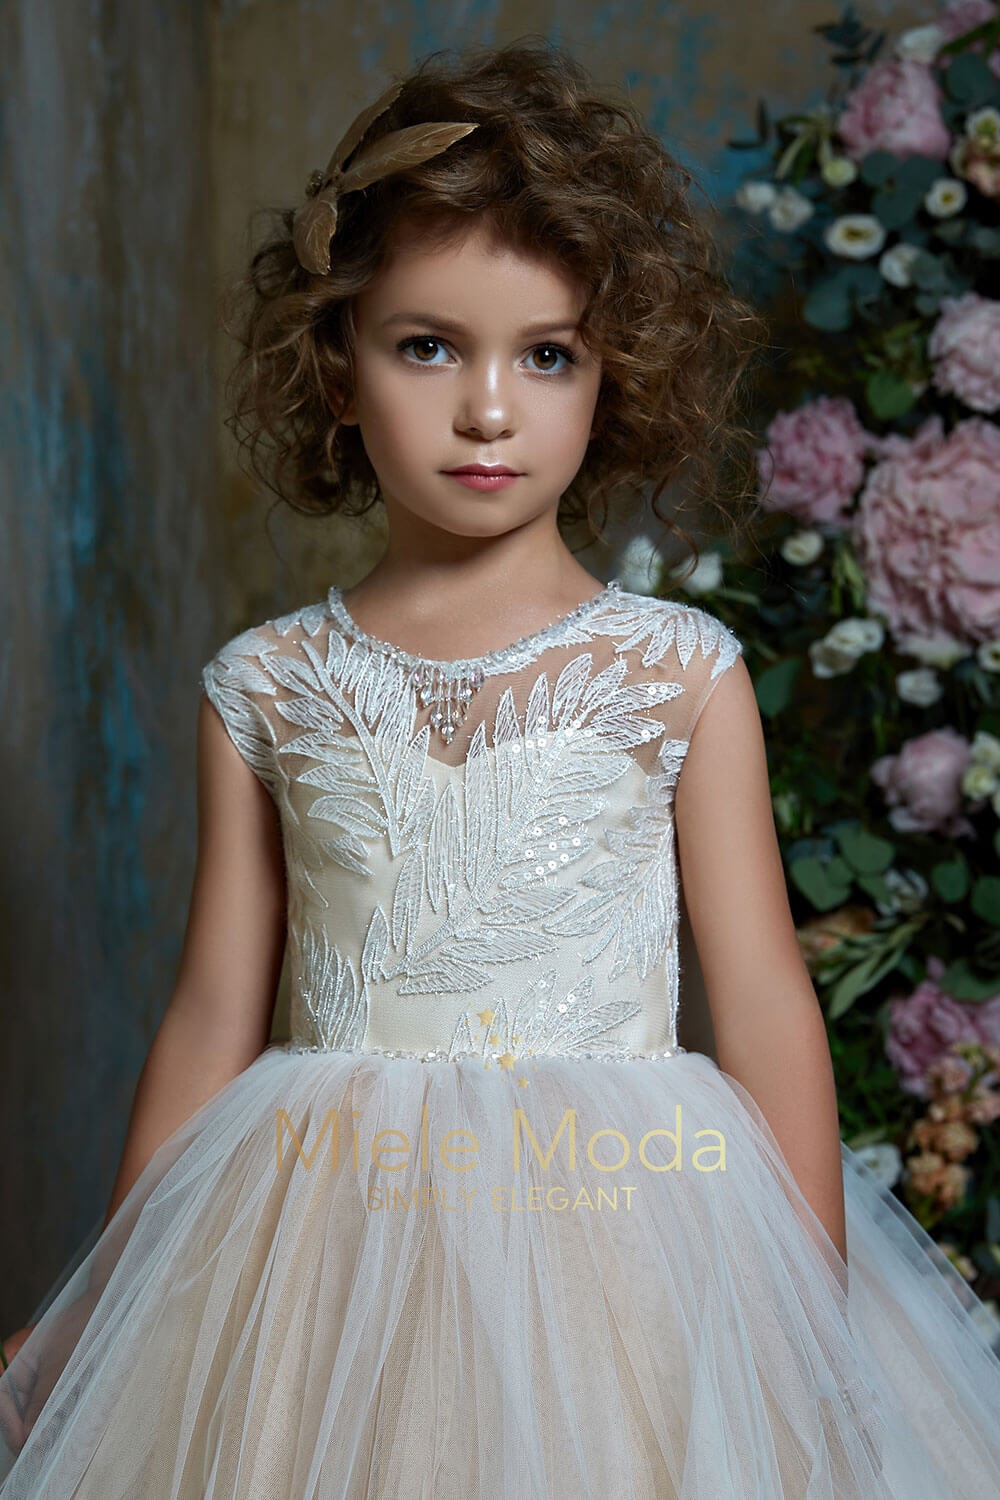 Pretty girl wearing Capri Flower Girl Couture Dress with Cape-by Miele Moda Boutique